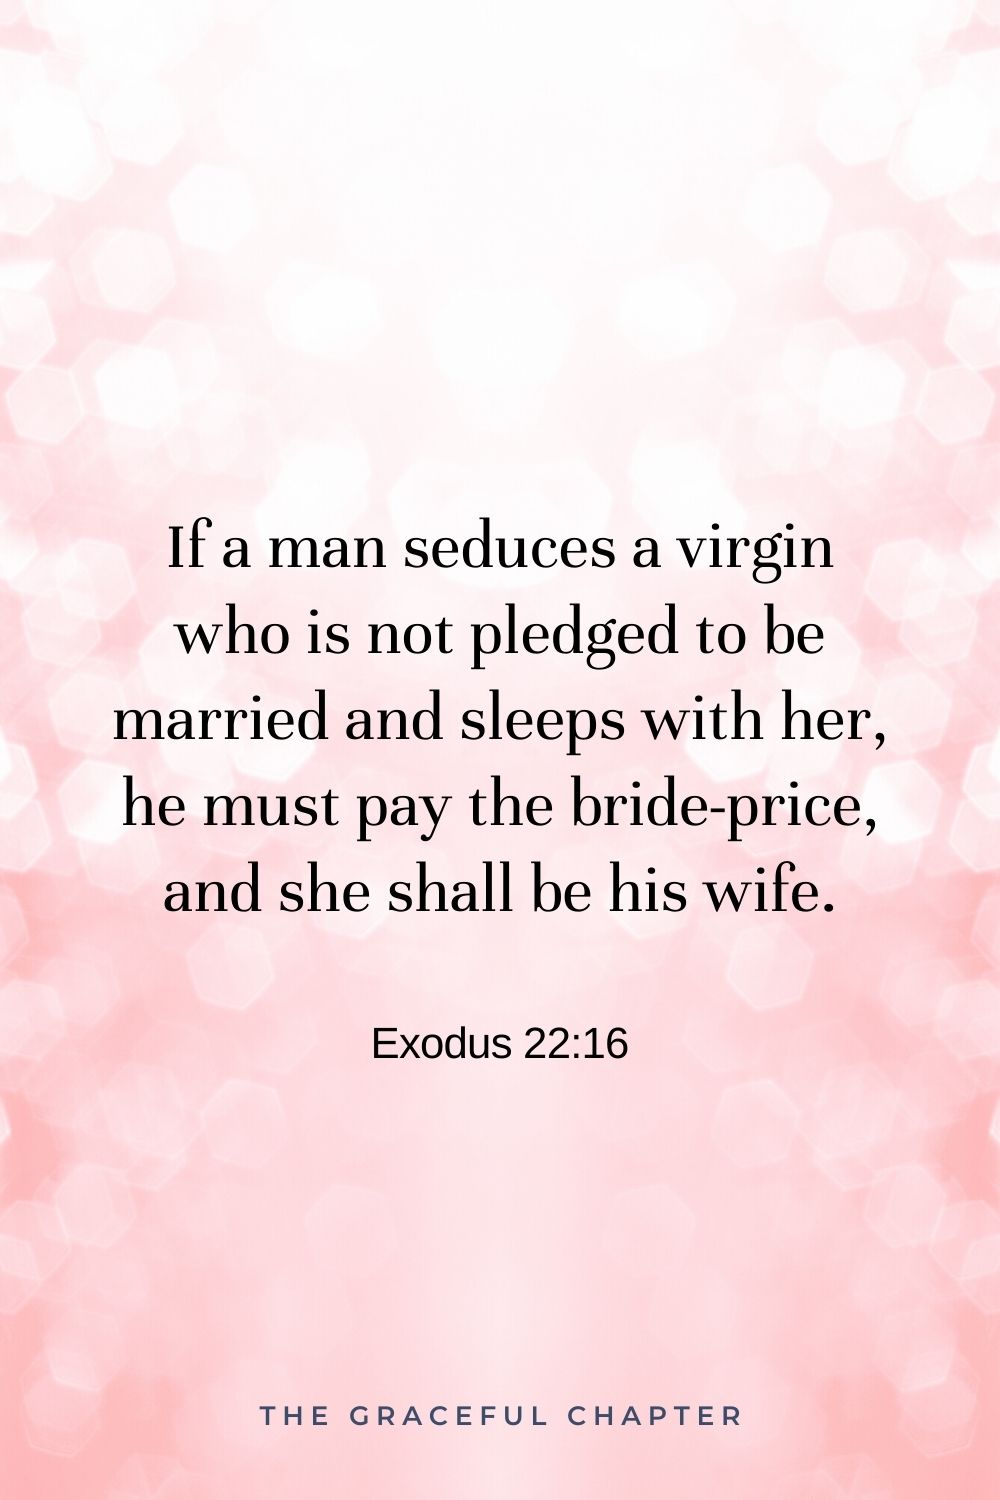 If a man seduces a virgin who is not pledged to be married and sleeps with her, he must pay the bride-price, and she shall be his wife. Exodus 22:16